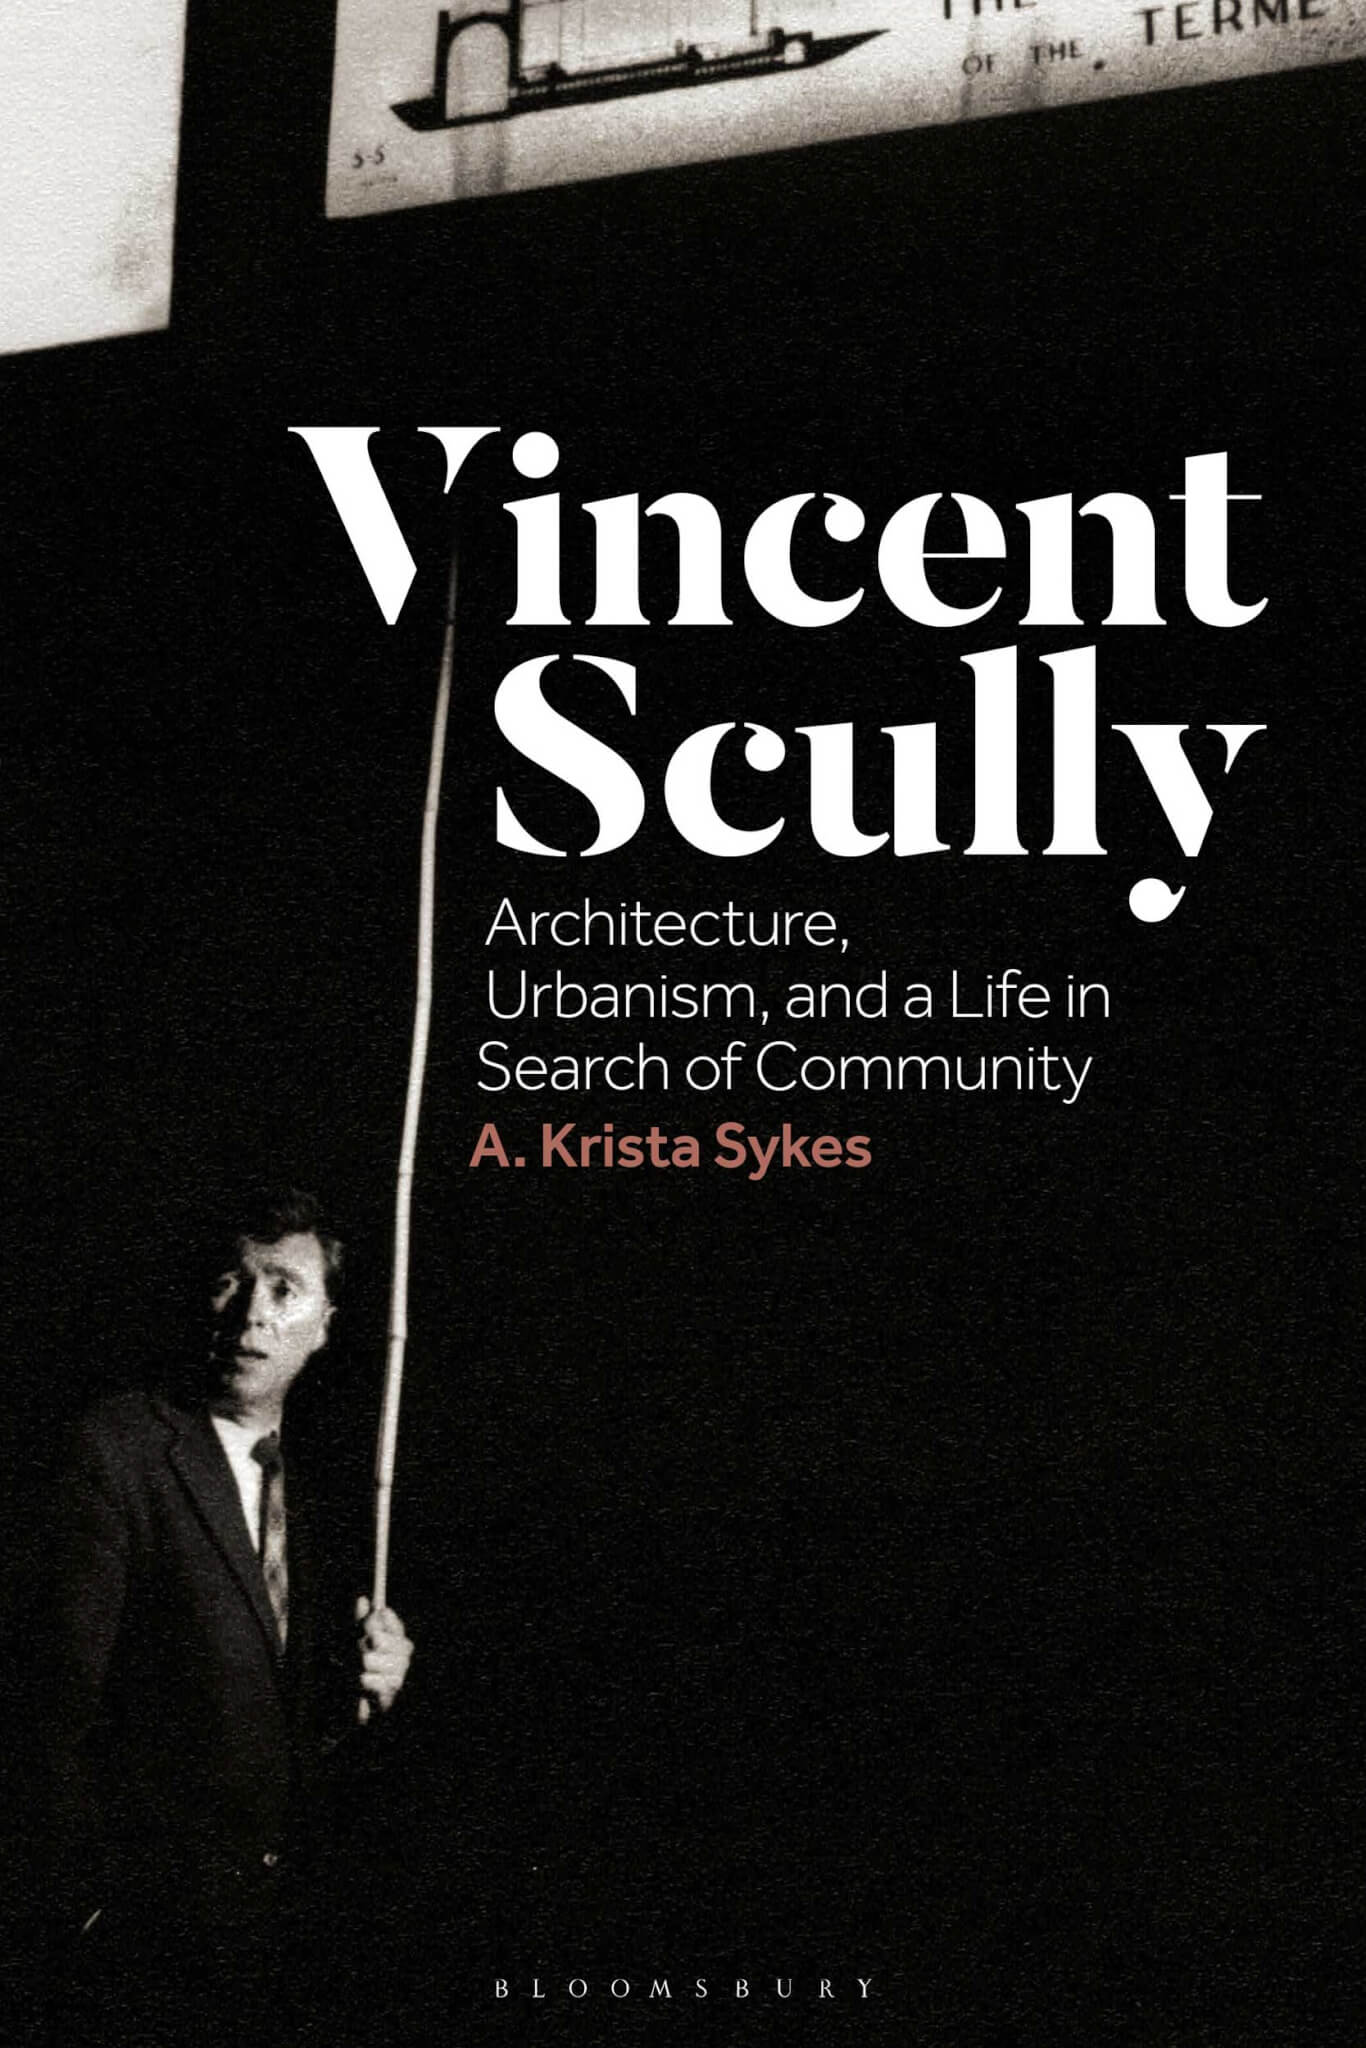 book cover for Vincent Scully biography